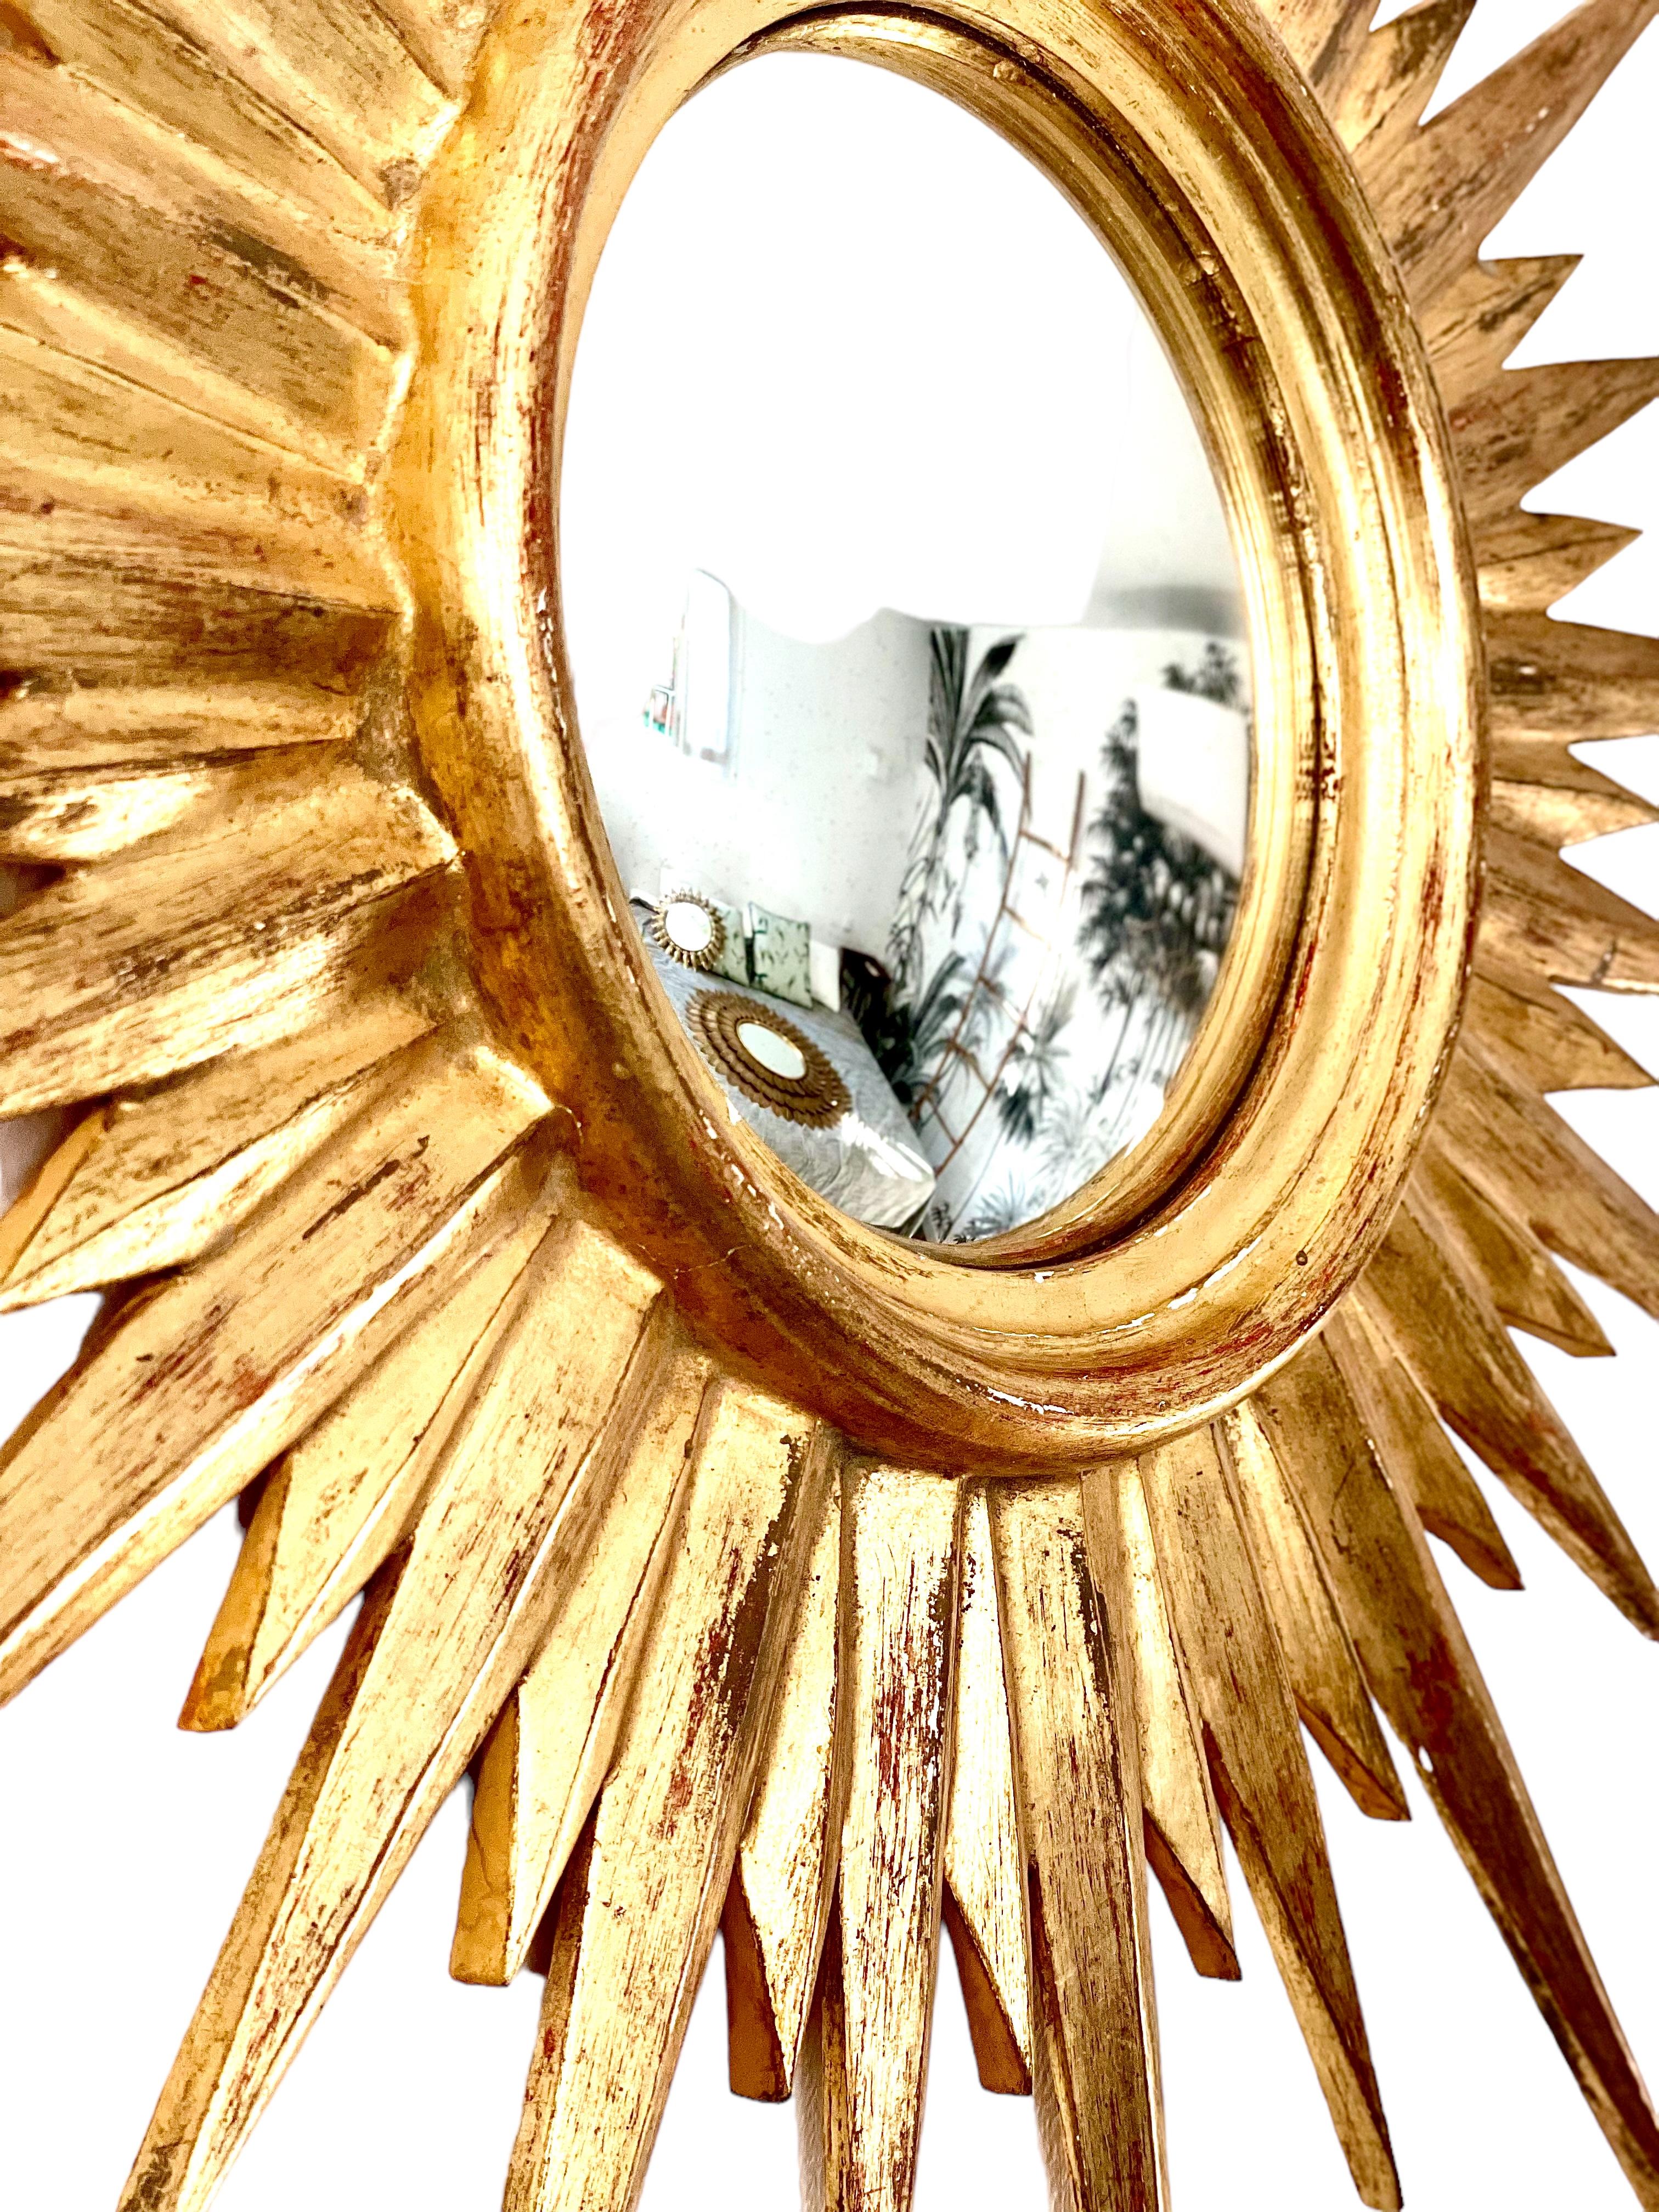 A wide and exquisite French sunburst convex mirror in golden stucco. 
In great condition.
